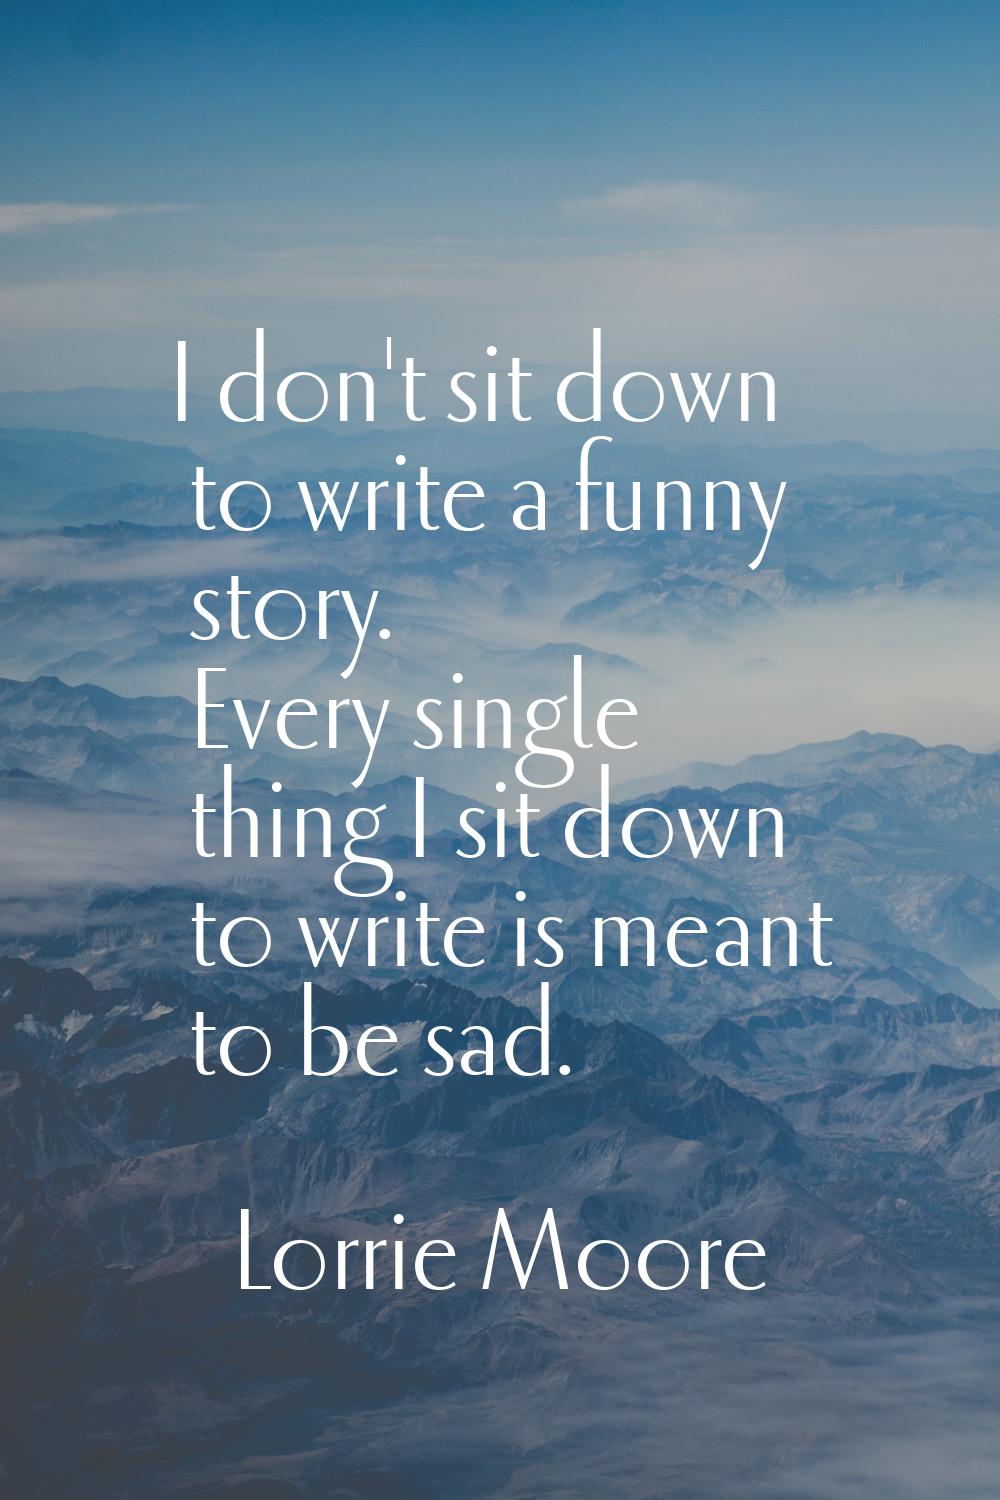 I don't sit down to write a funny story. Every single thing I sit down to write is meant to be sad.